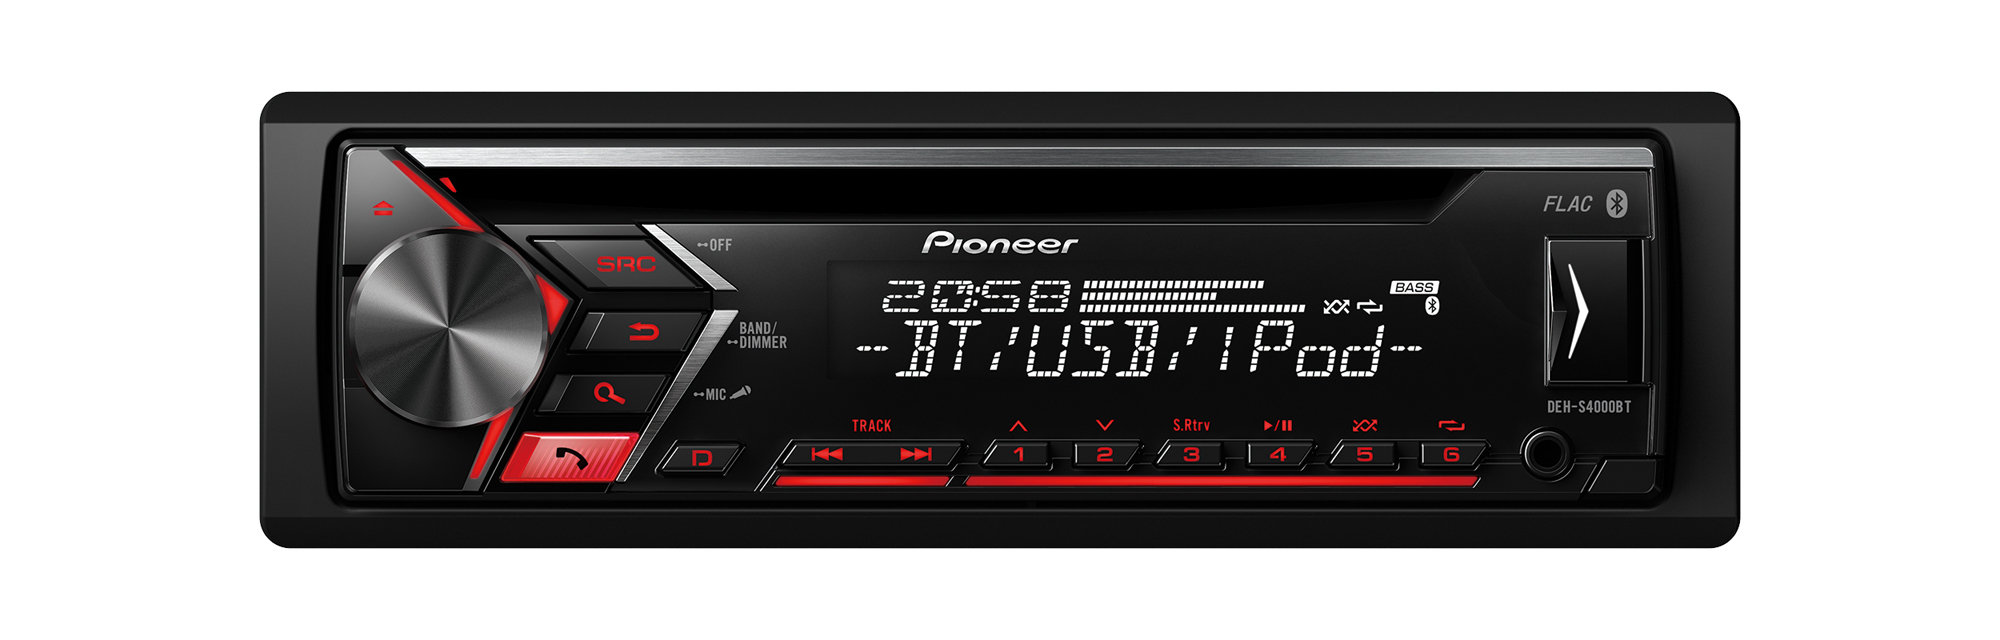 Pioneer DEH-S4000BT CD Receiver with Bluetooth | Quadratec